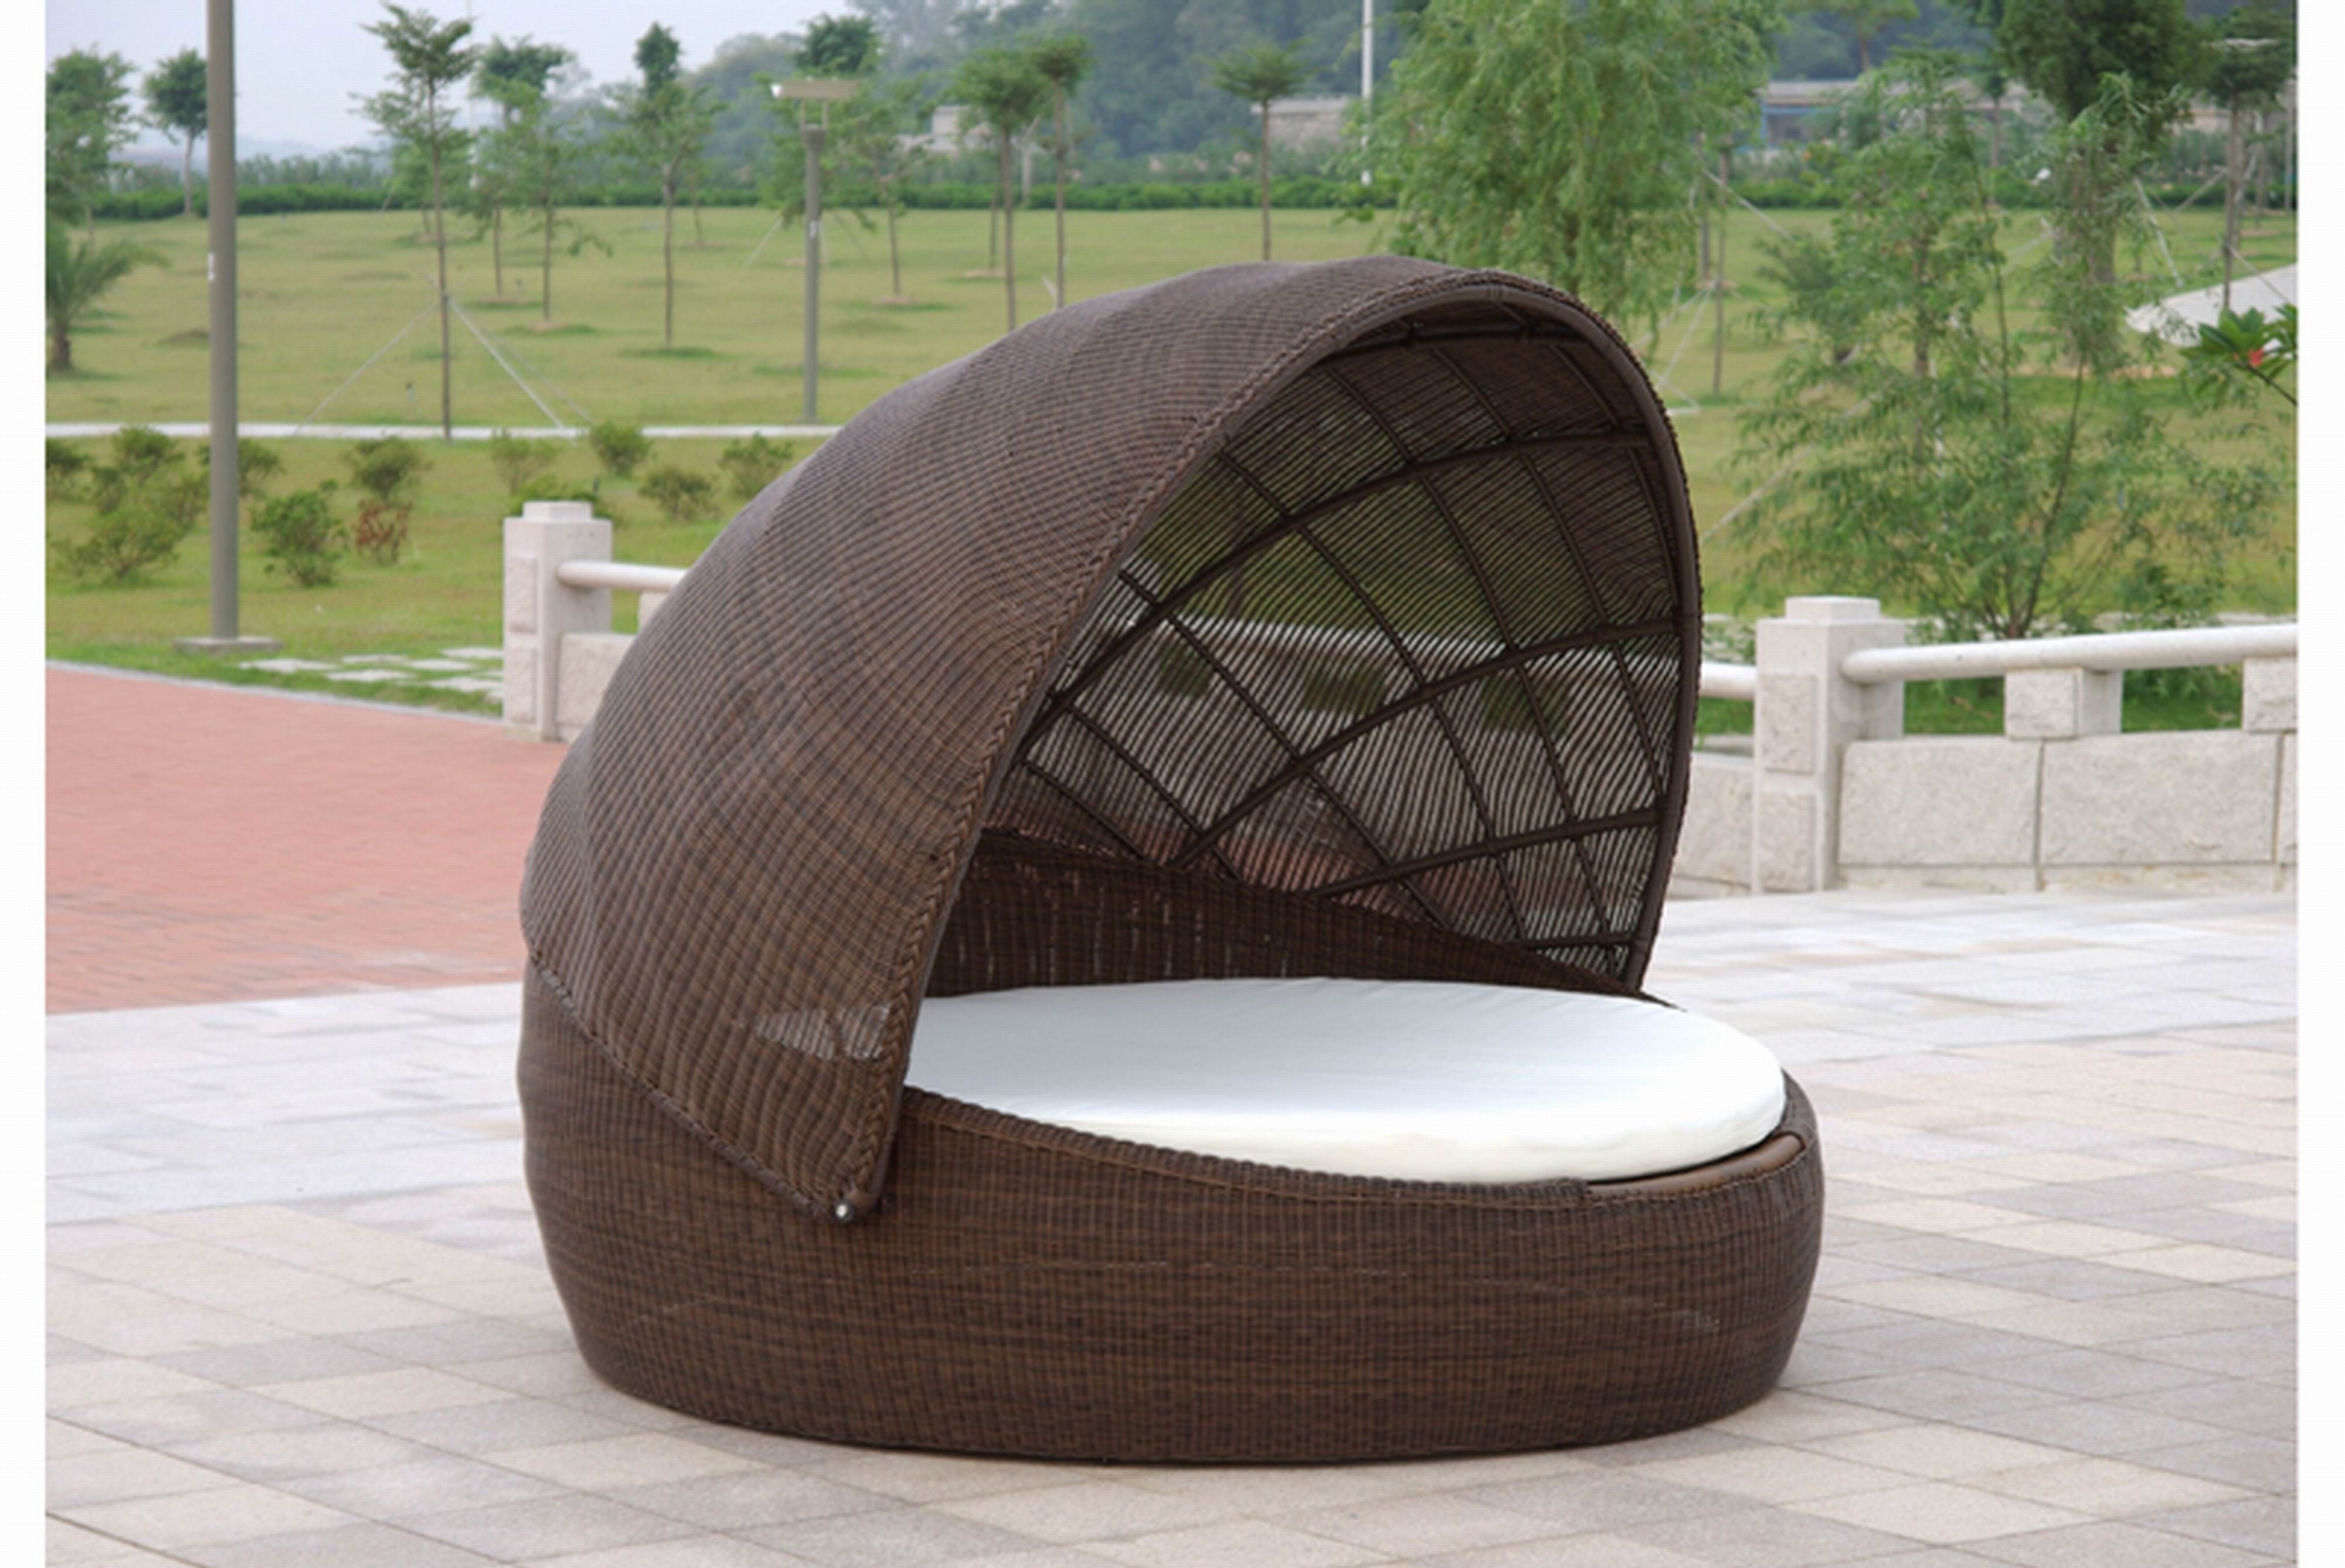 Outdoor Chaise Lounge Chairs With Canopy Pertaining To Most Popular Canopy Lounge Chair Outdoor • Lounge Chairs Ideas (View 11 of 15)